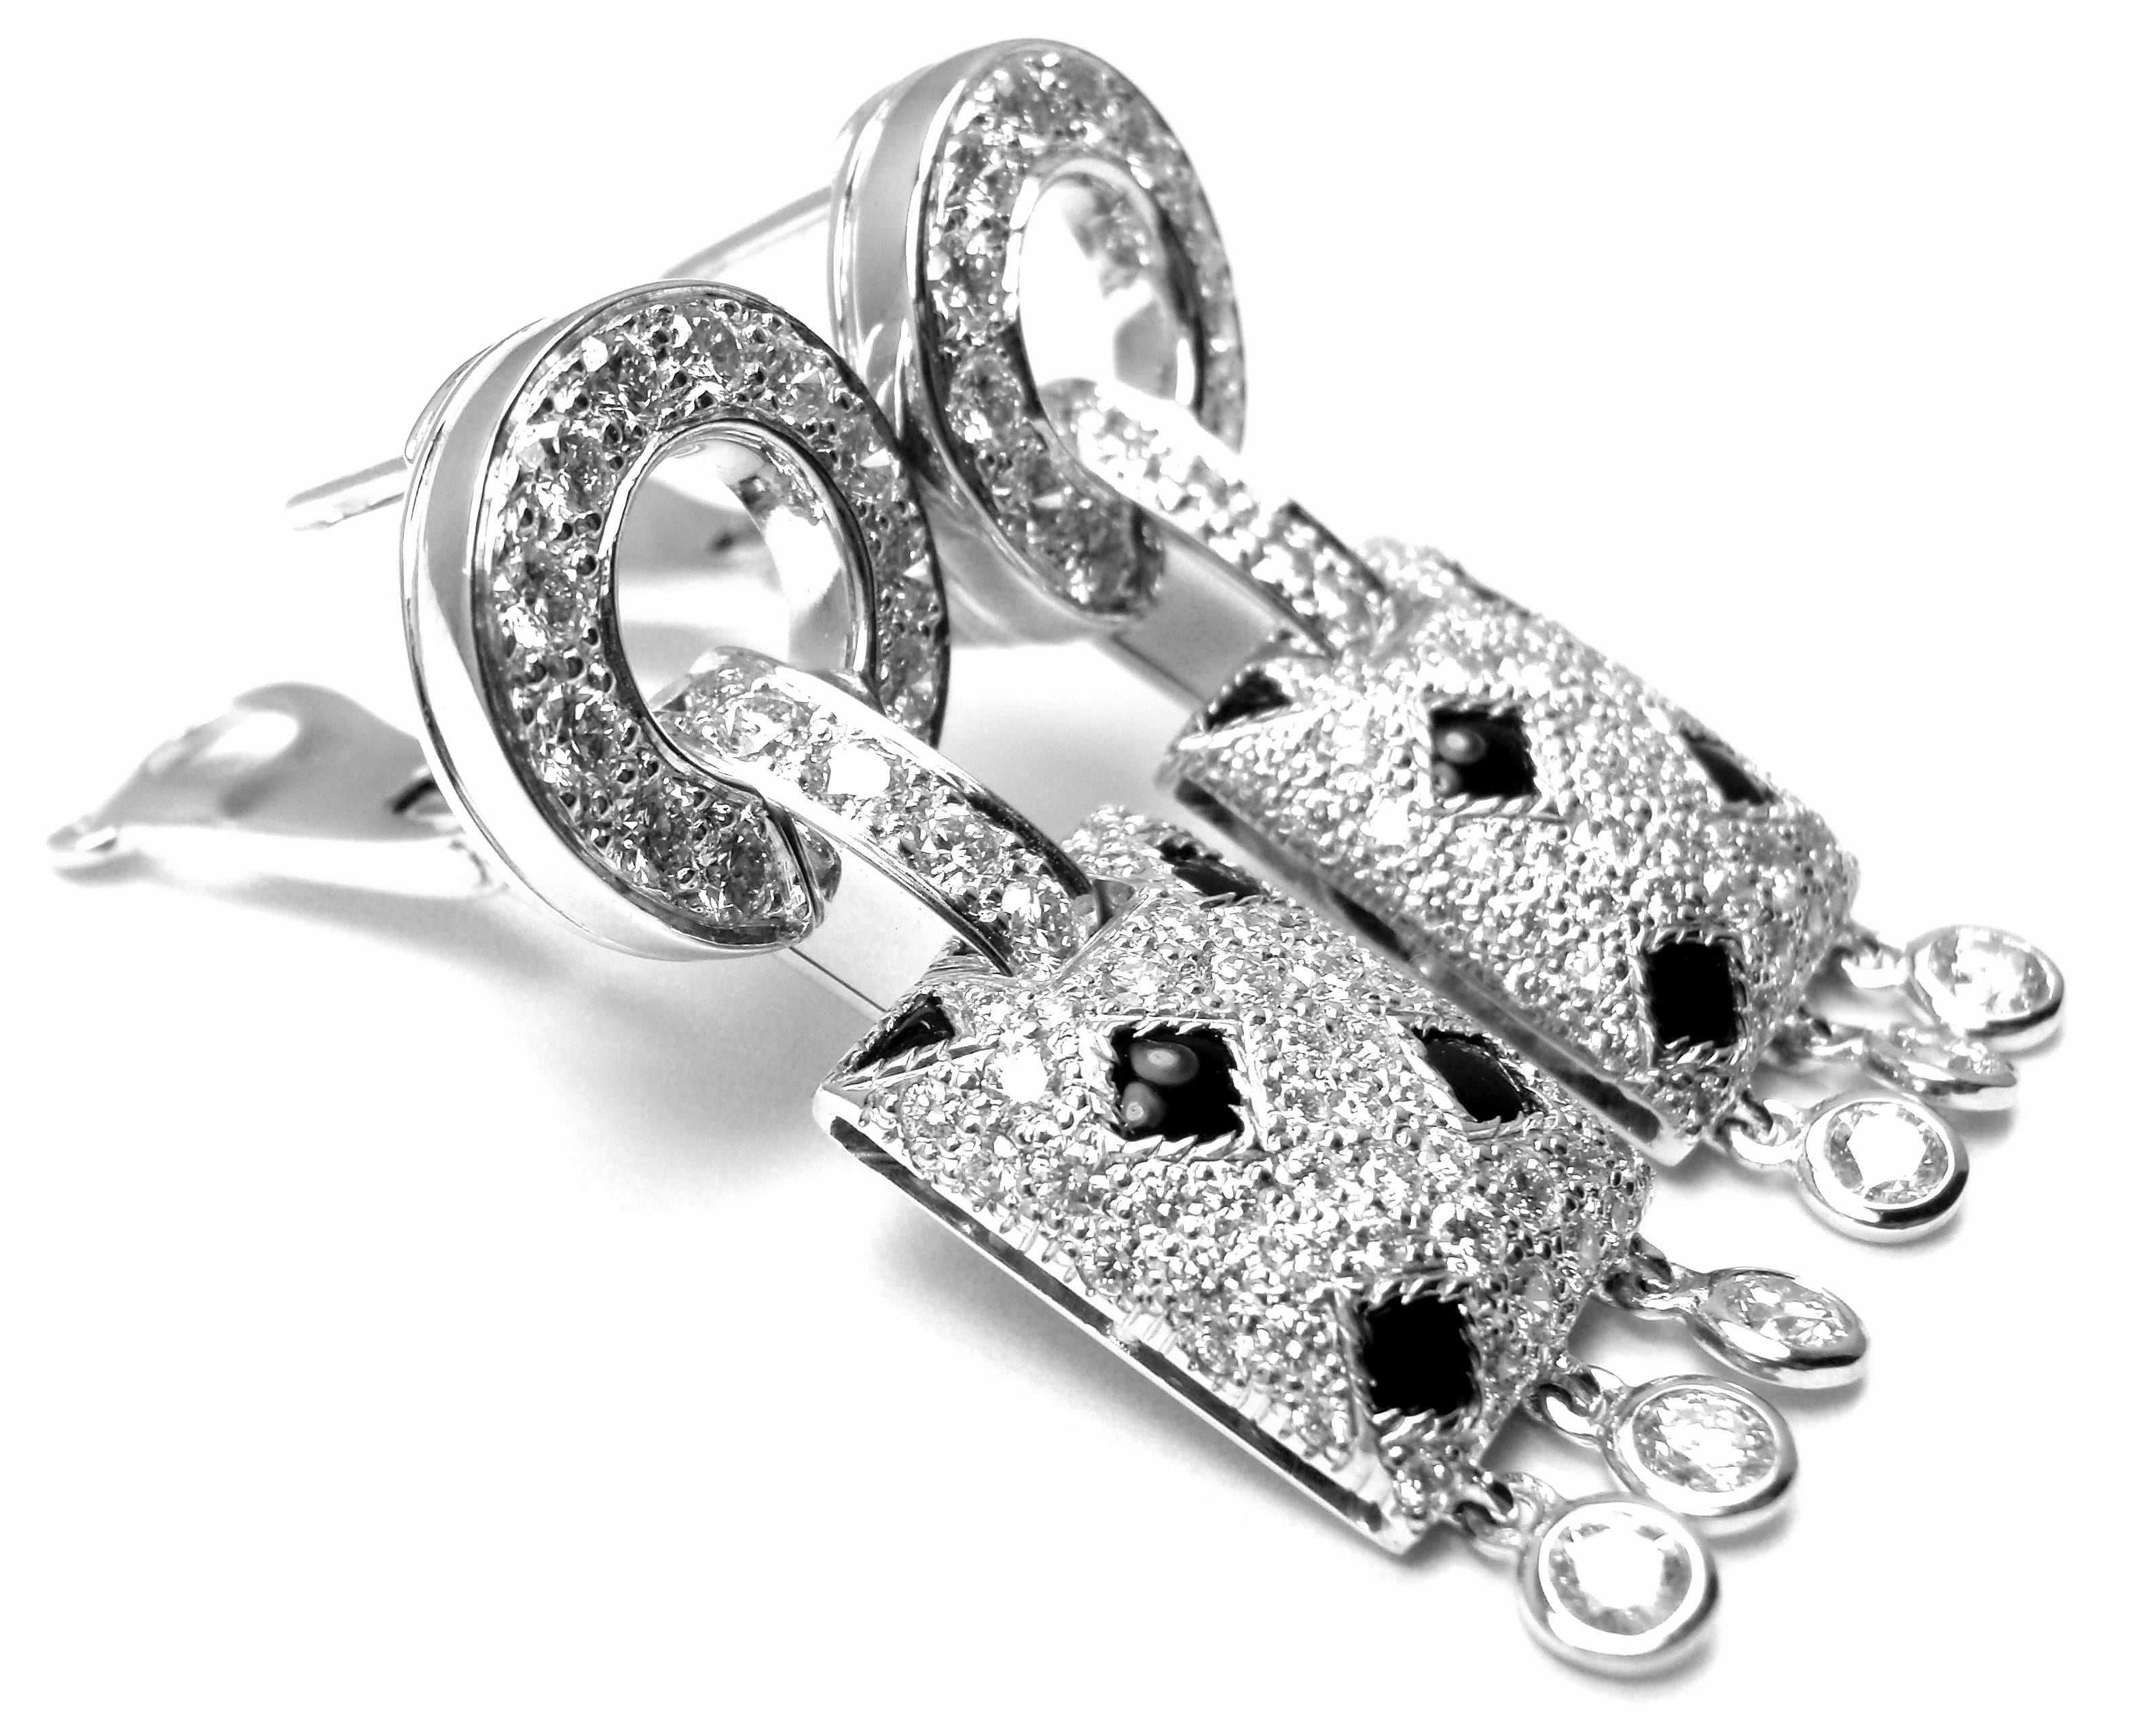 18k White Gold Panthere Diamond And Black Onyx Earrings by Cartier. 
With Round brilliant cut diamonds total weight approx .98ct.
Diamonds VVS1 clarity, E color and black onyx
These earrings come with original Cartier box and a Cartier